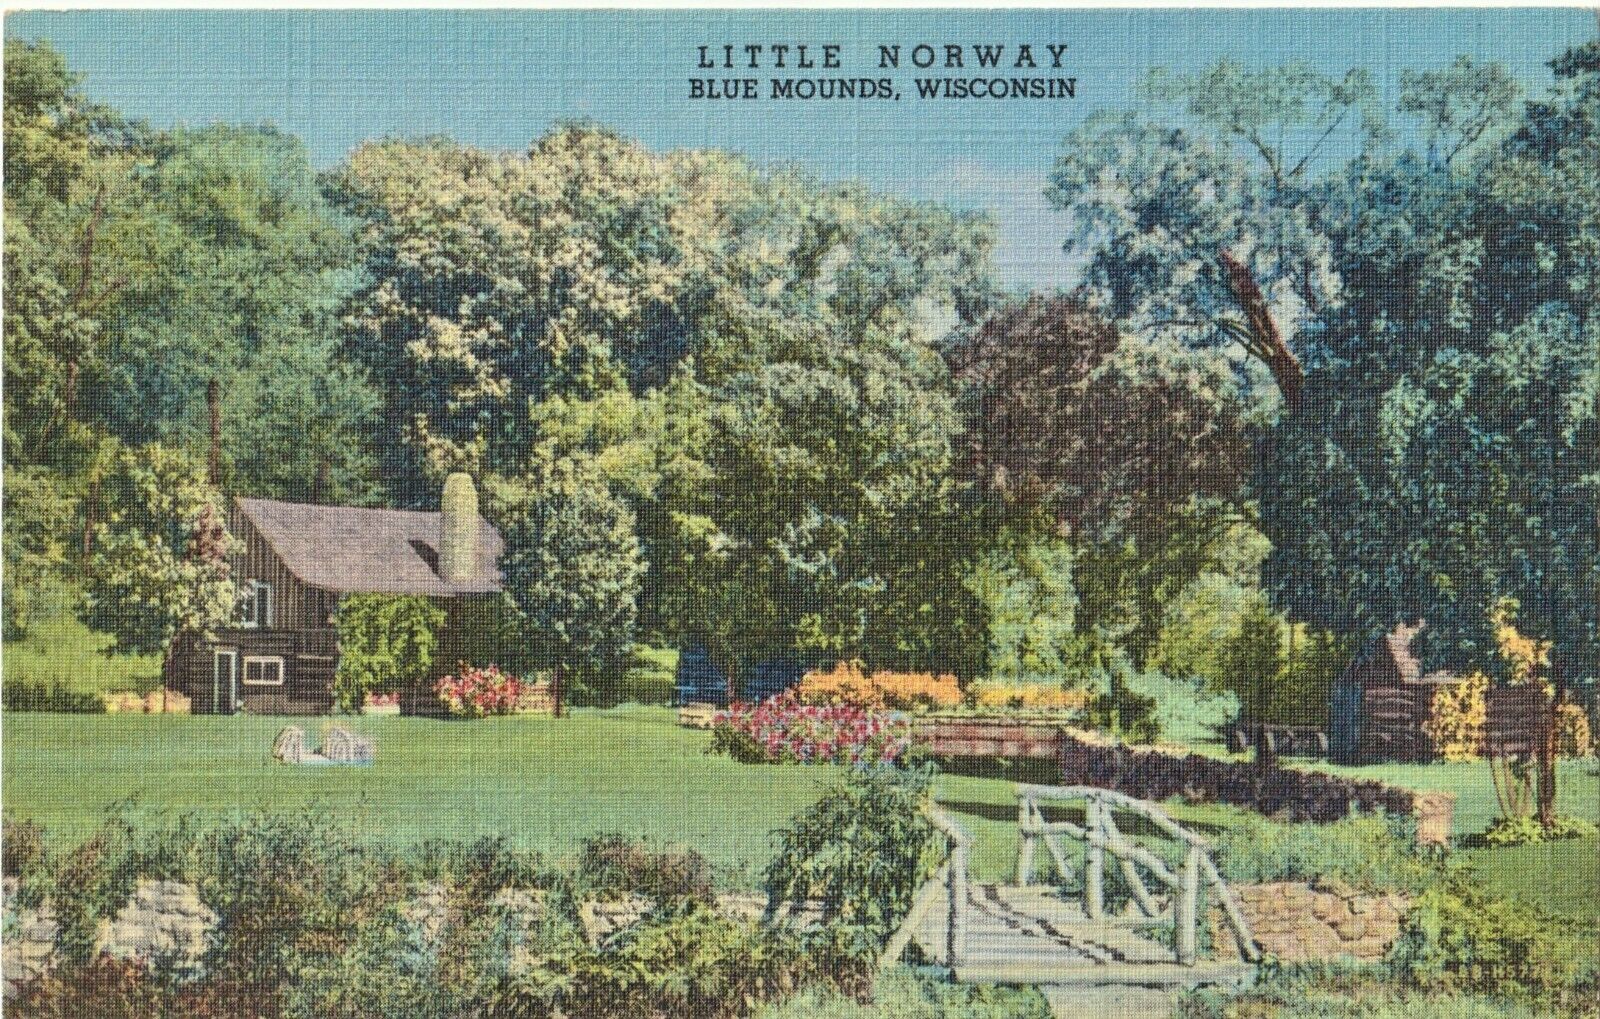 Little Norway, Blue Mounds, Wisconsin WI antique linen postcard unposted